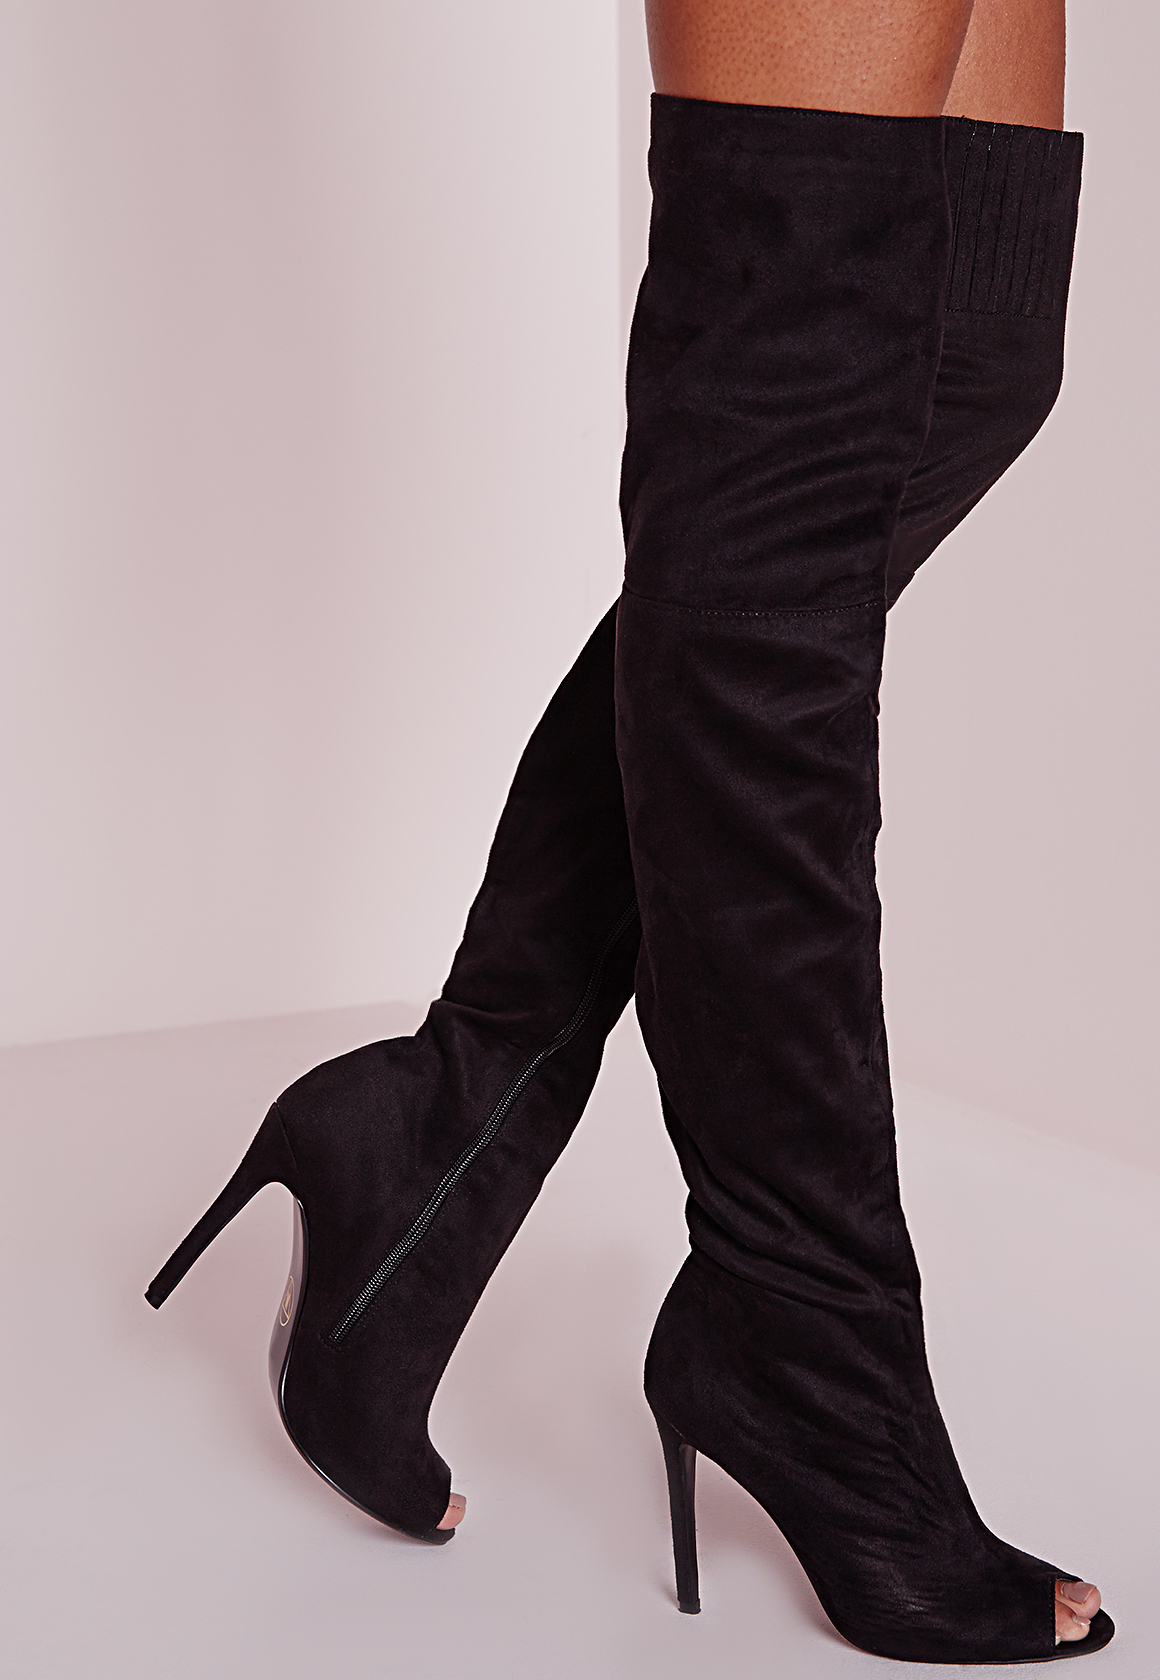 Missguided Peace + Love Over The Knee Peep Toe Boots Black in Black | Lyst